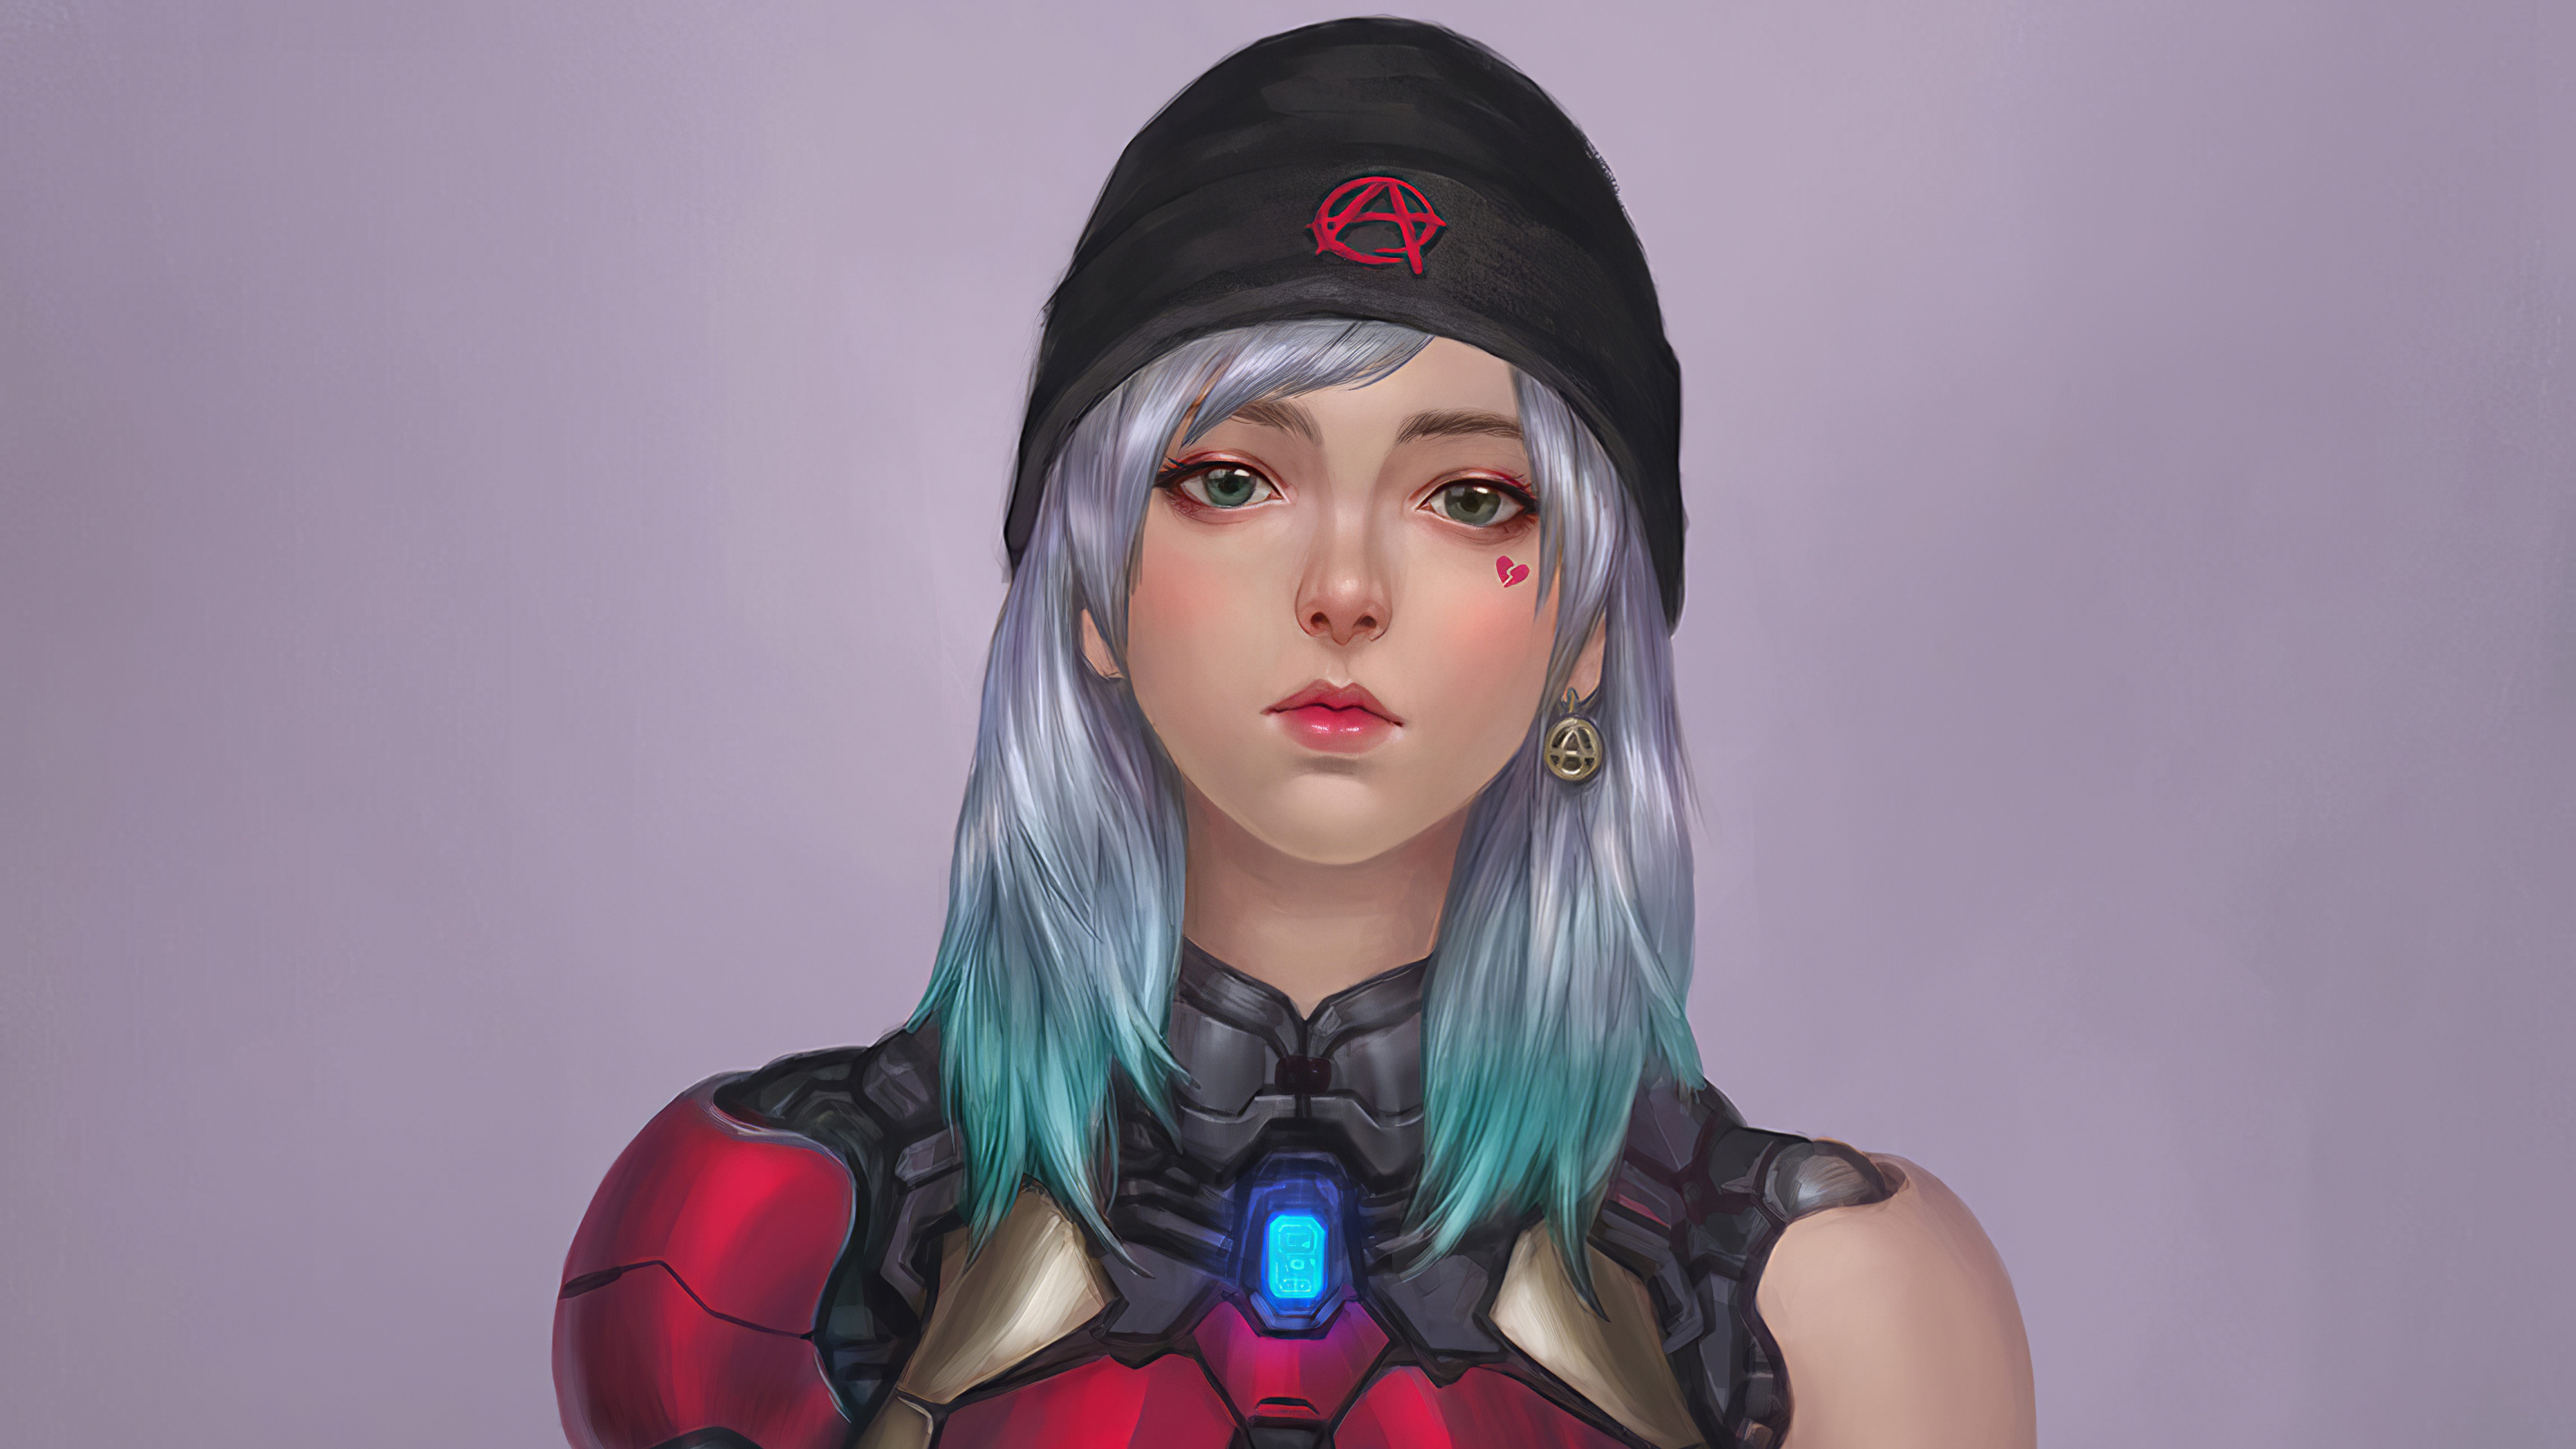 General 3840x2160 women simple background artwork cyborg science fiction science fiction women looking at viewer dyed hair beanie Anarchy  anime